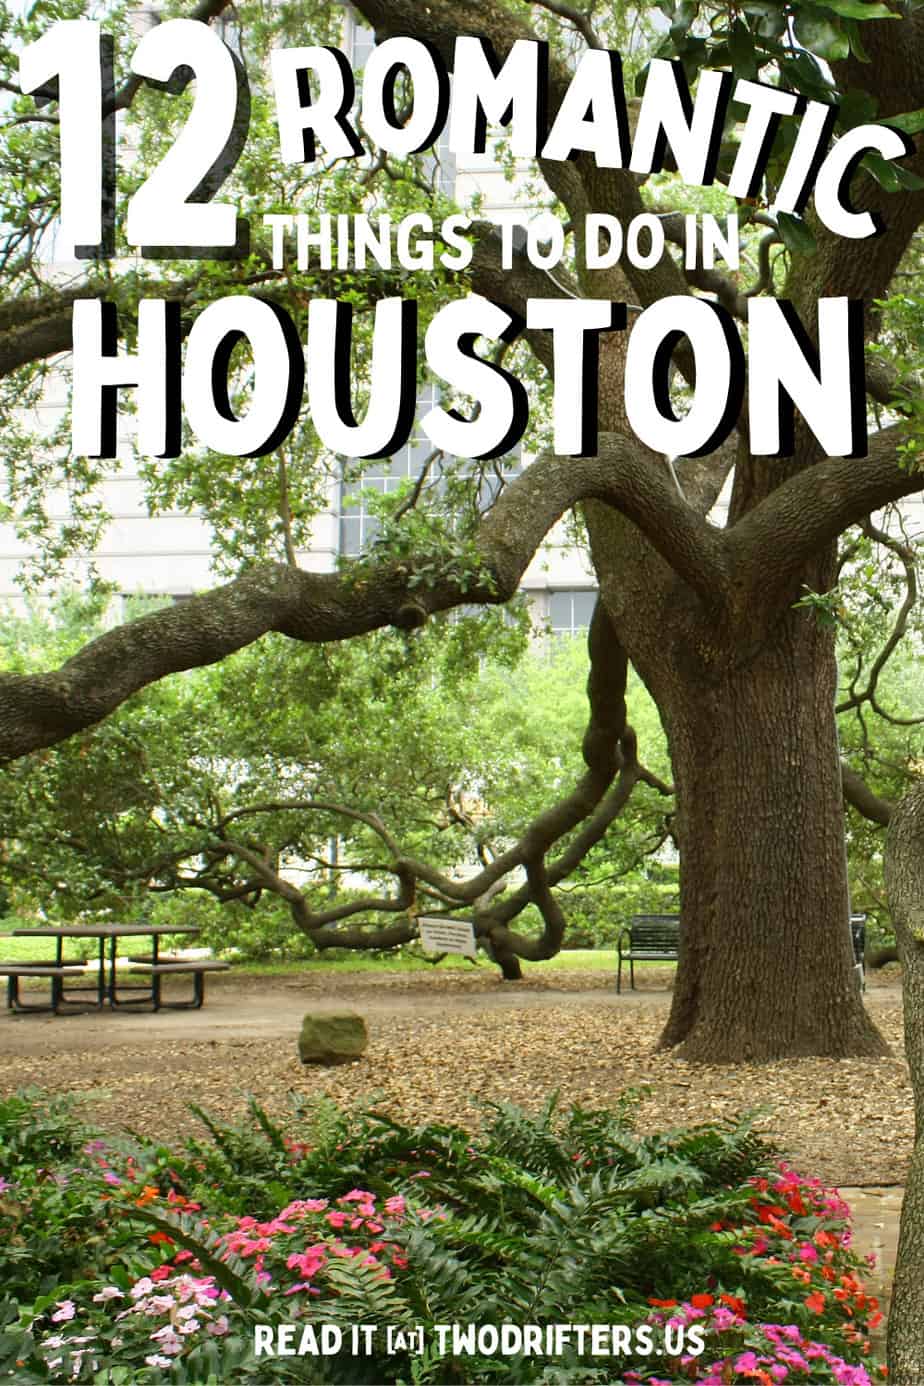 Pinterest social image that says "12 Romantic Things to do in Houston."